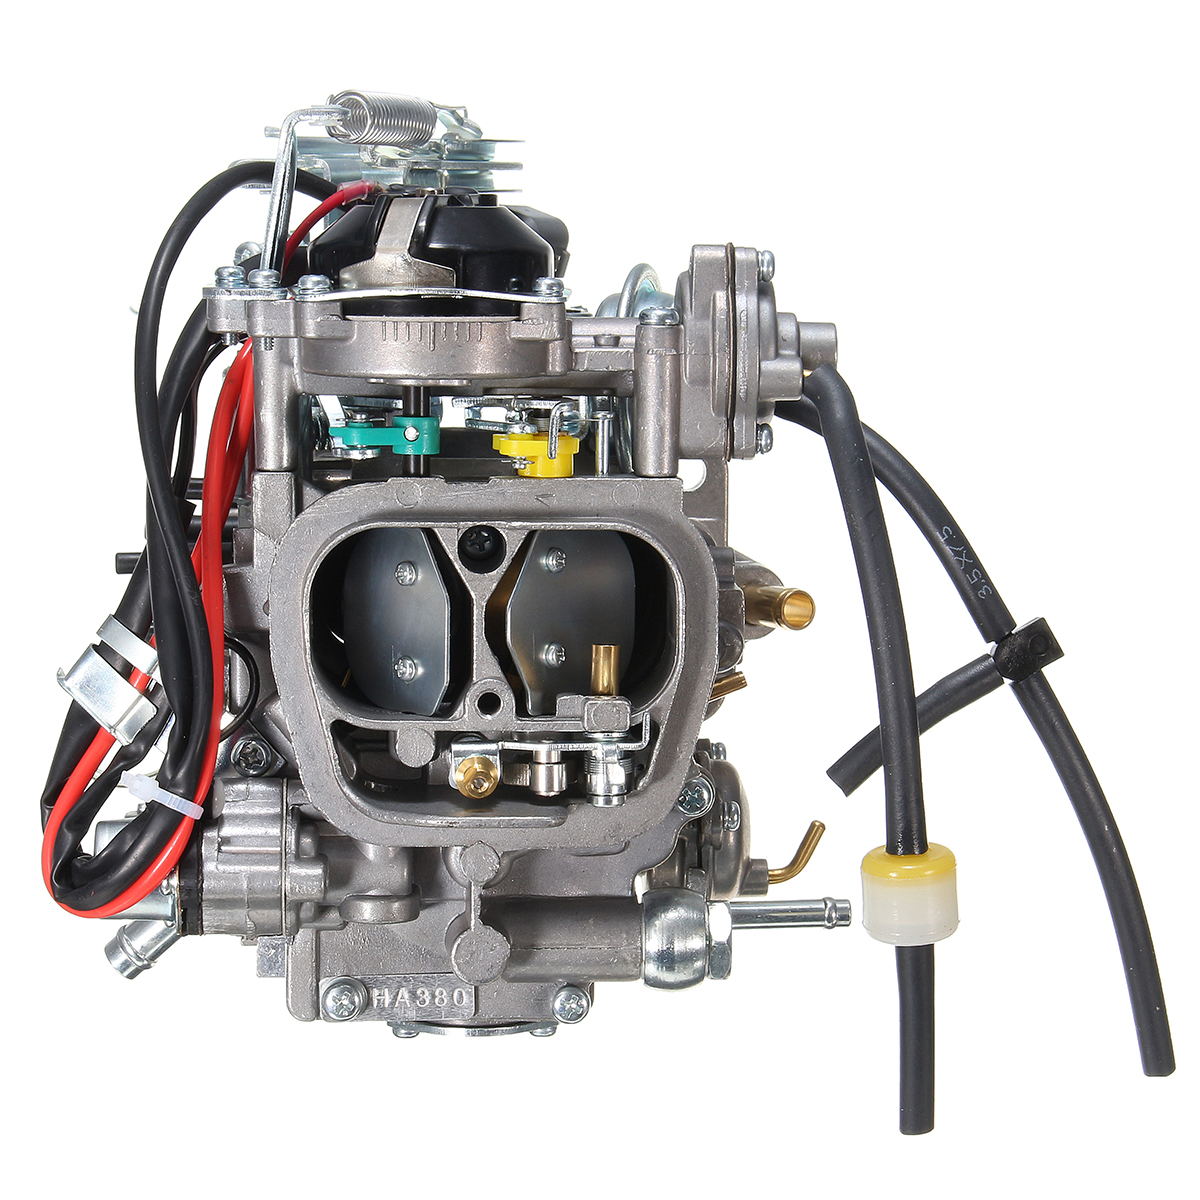 Carb-Carburetor-Trucks-For-Toyota-22R-Celica-4-Runner-Style-Engine-Oil-free-and-Grease-free-1347170